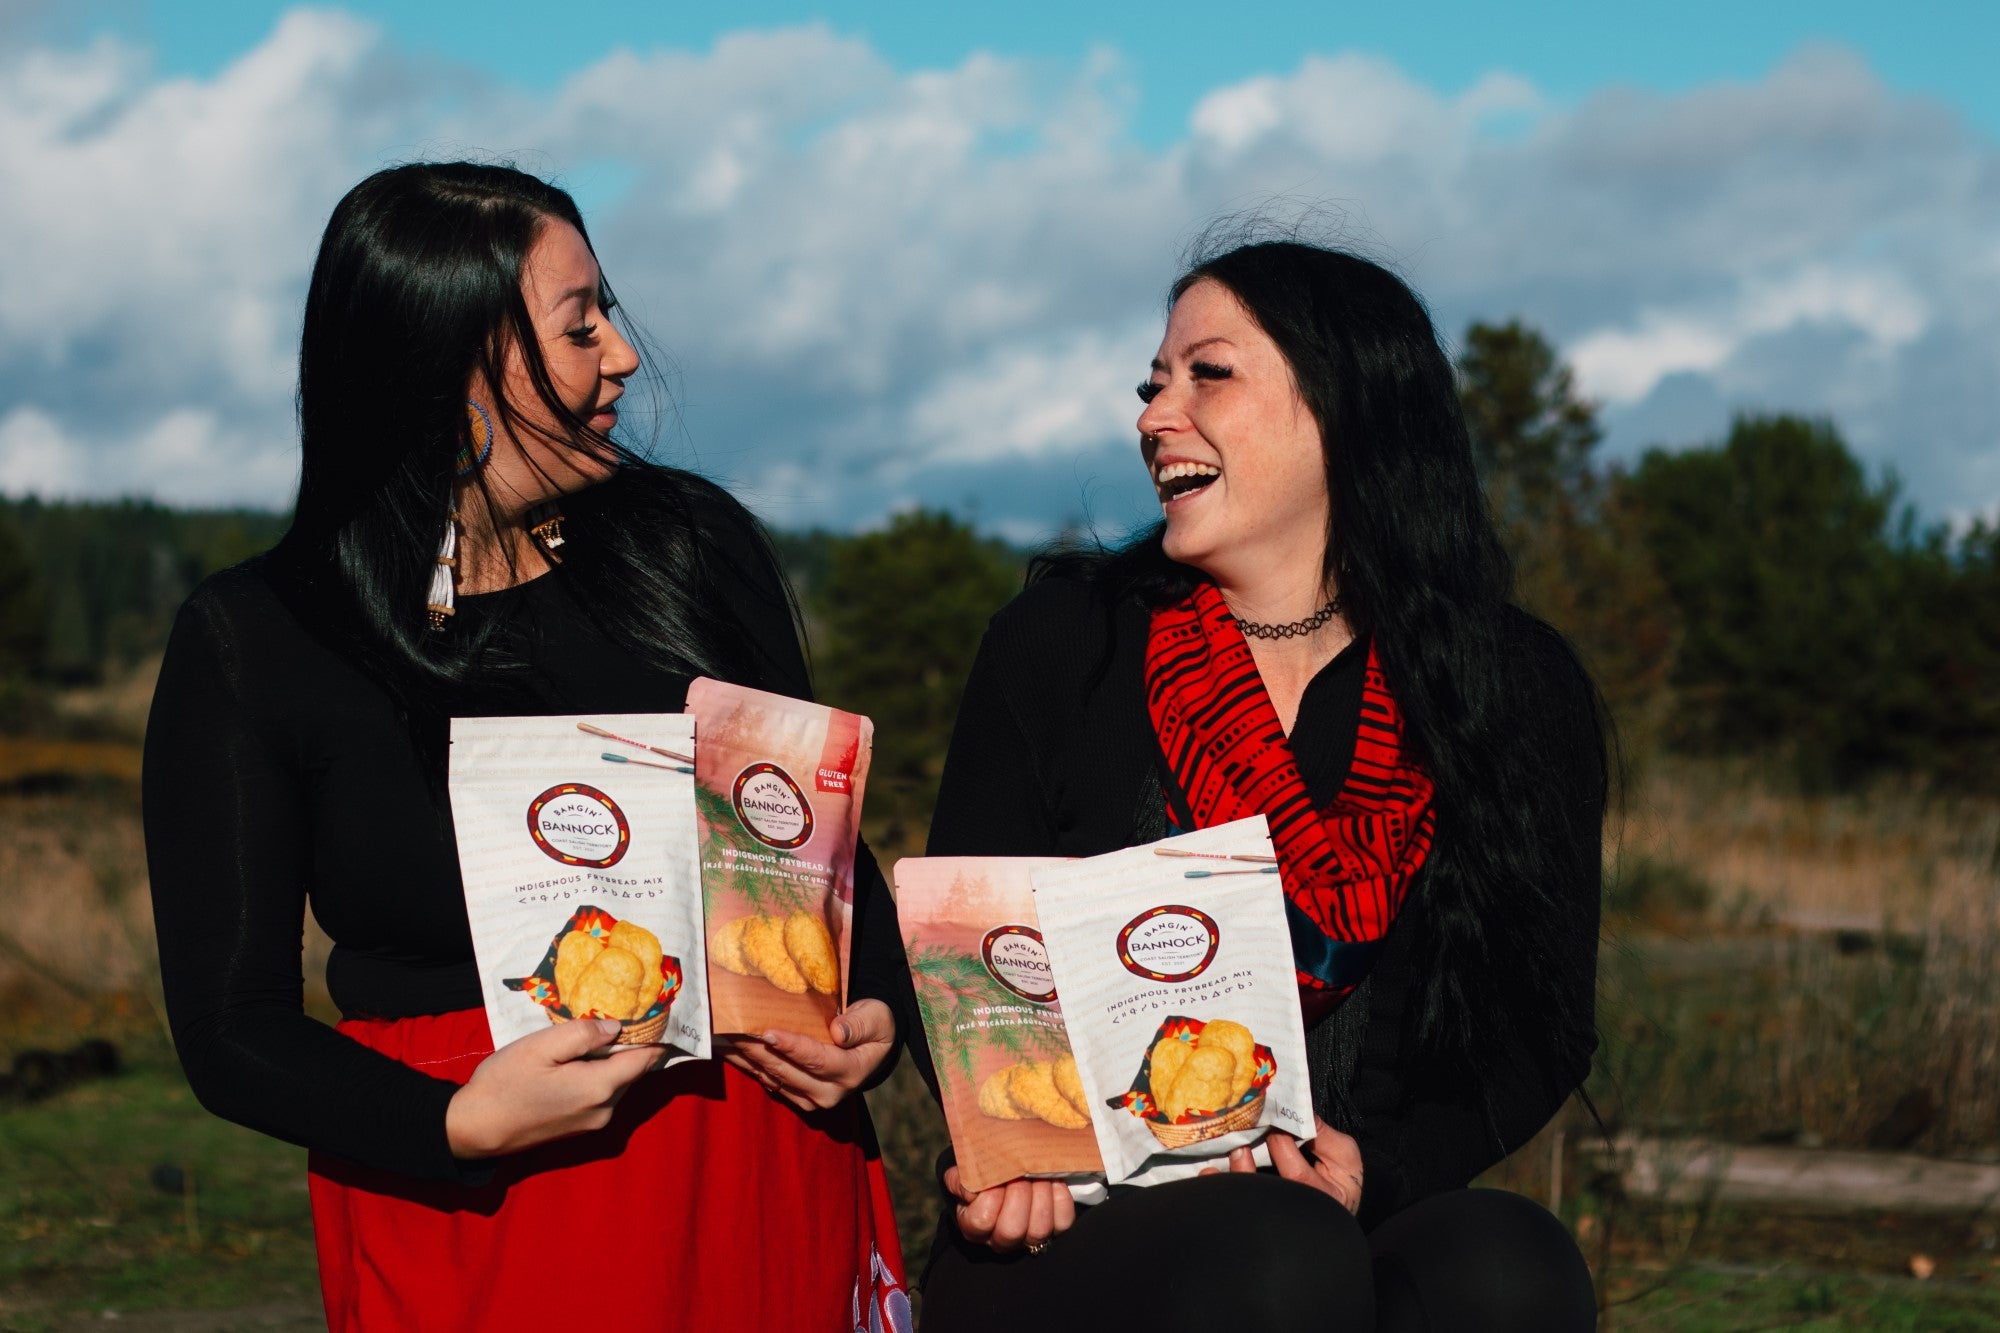 Bangin' Bannock owners Destiny Houshte and Kelsey Coutts holding bannock mix bags